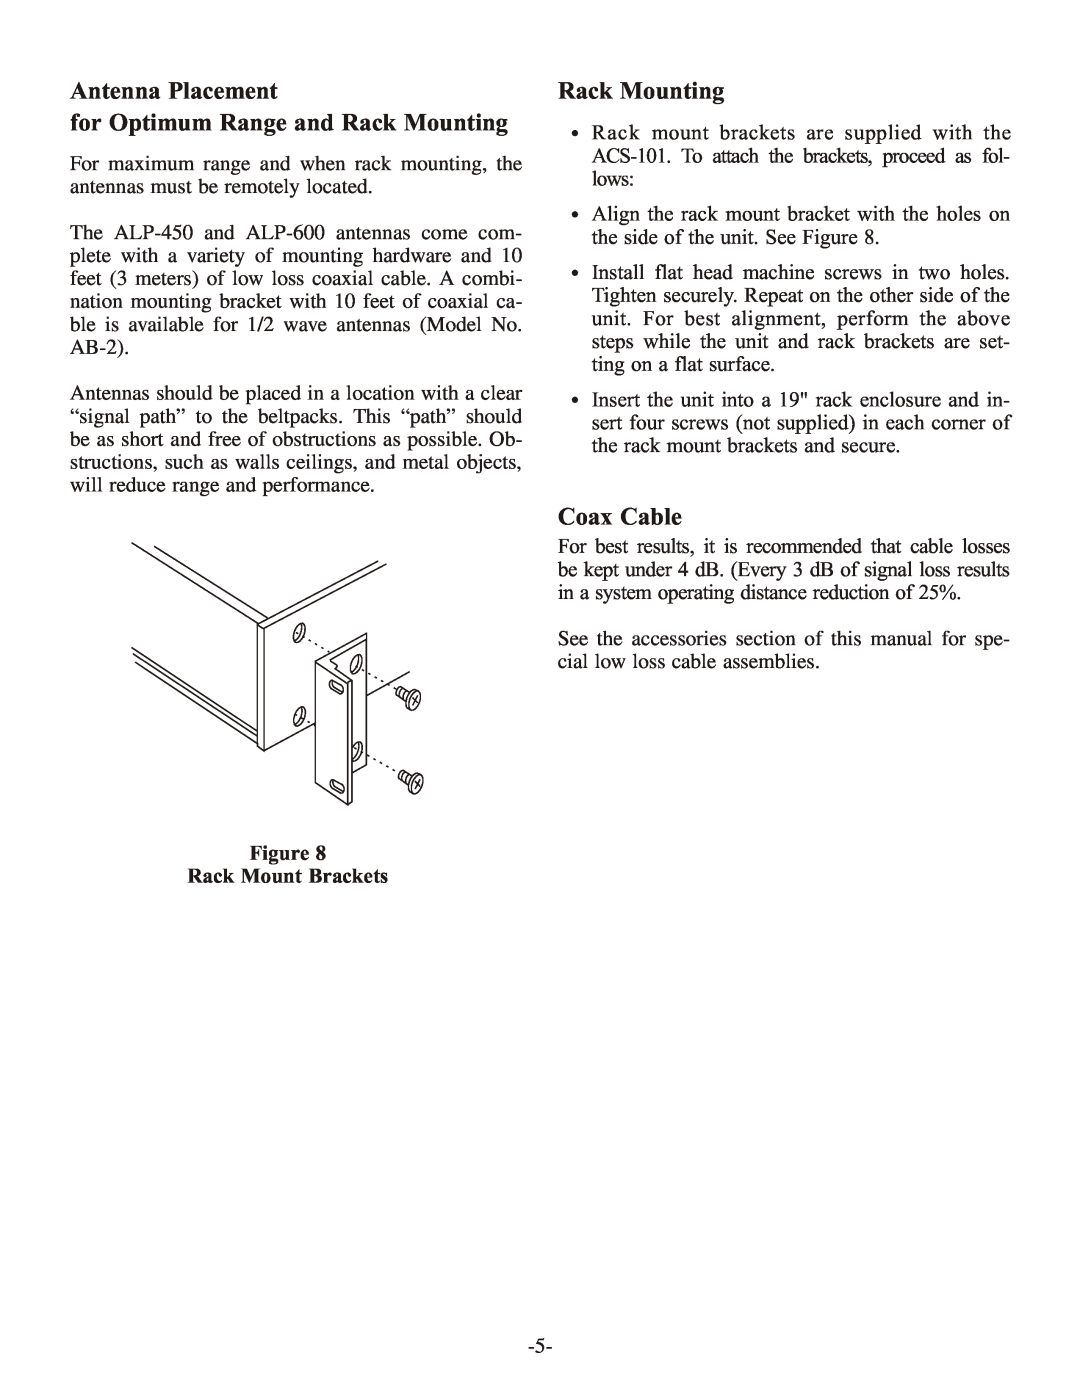 Telex ACS-101 instruction sheet Antenna Placement for Optimum Range and Rack Mounting, Coax Cable, Rack Mount Brackets 